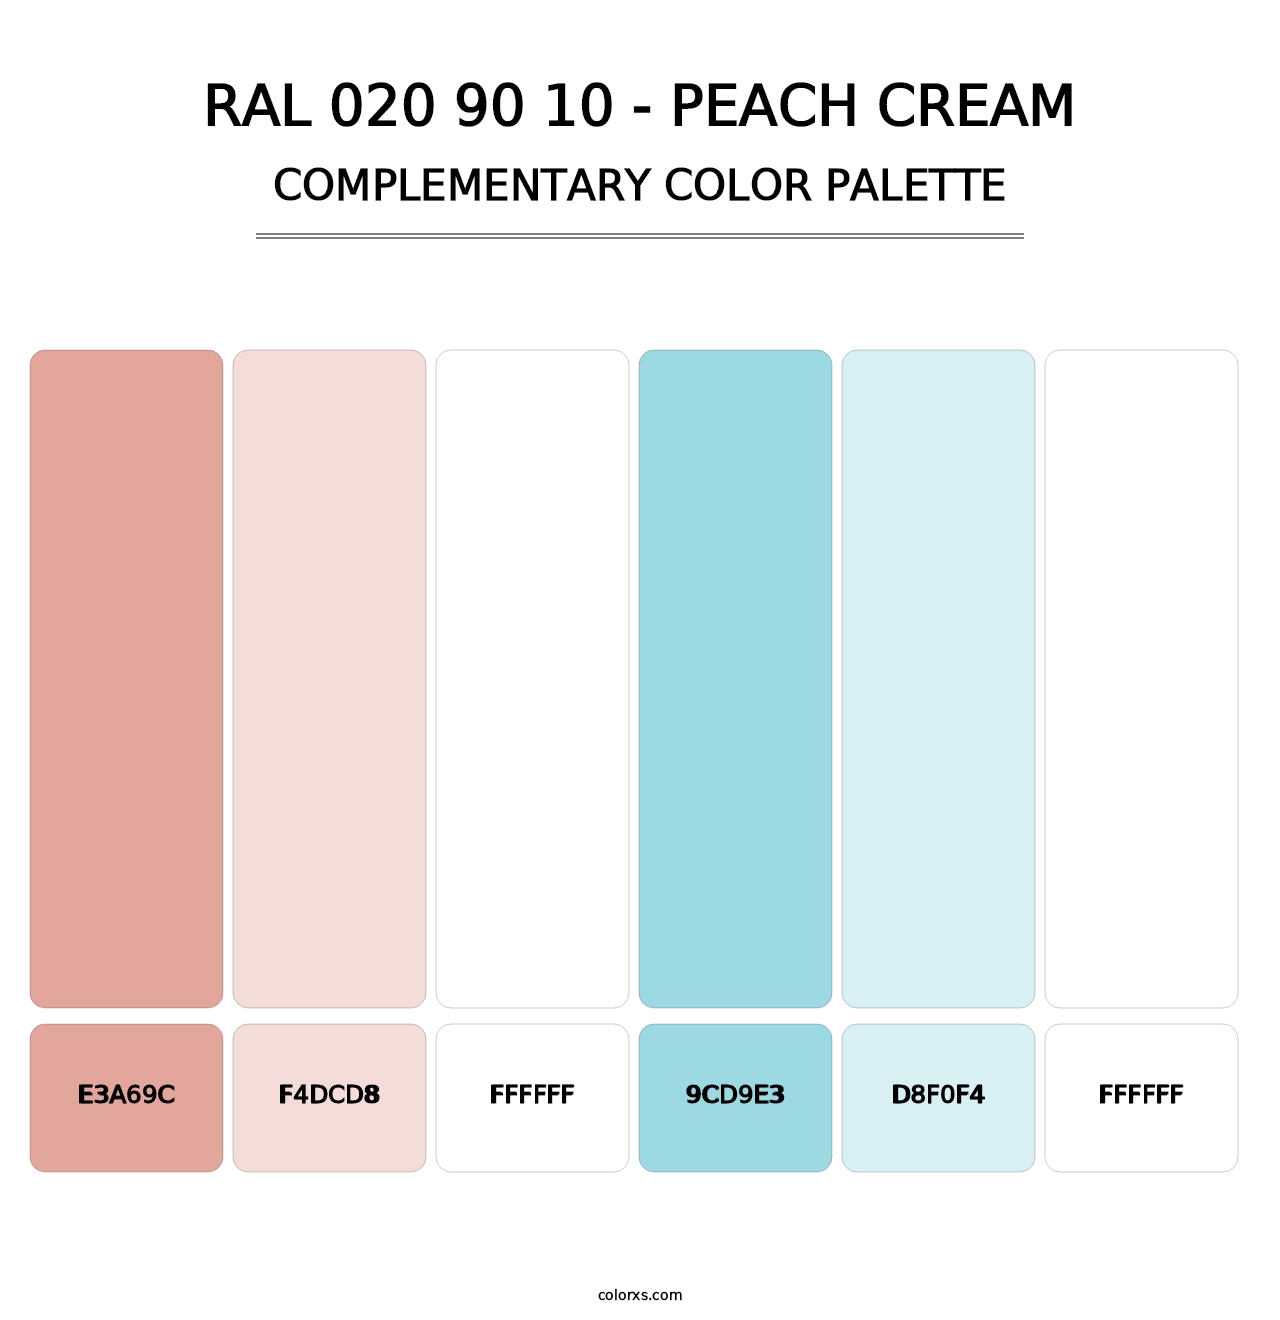 RAL 020 90 10 - Peach Cream - Complementary Color Palette